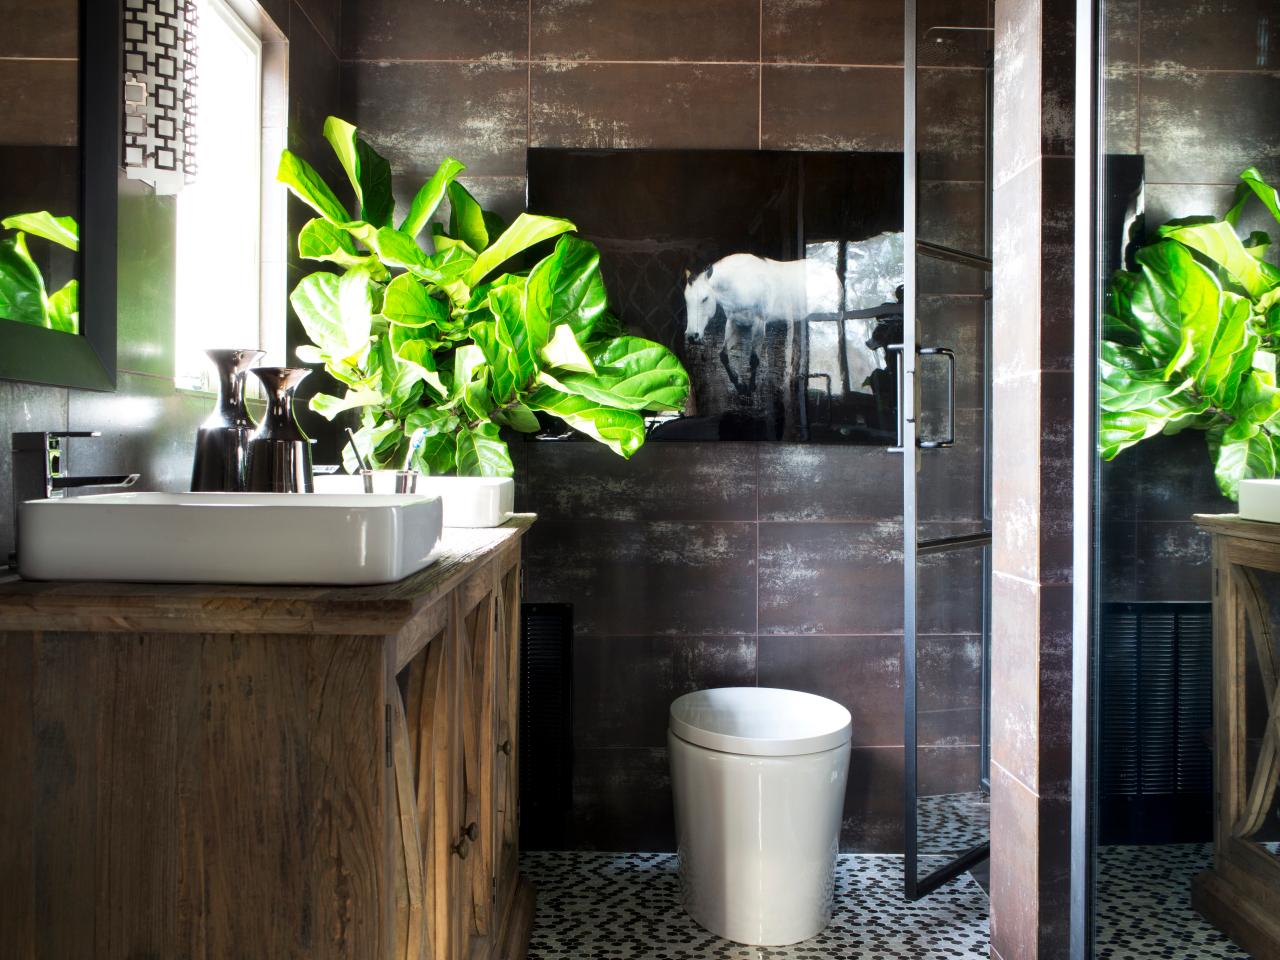 Beautiful and Fresh, These Are Plants That Are Suitable For Bathrooms